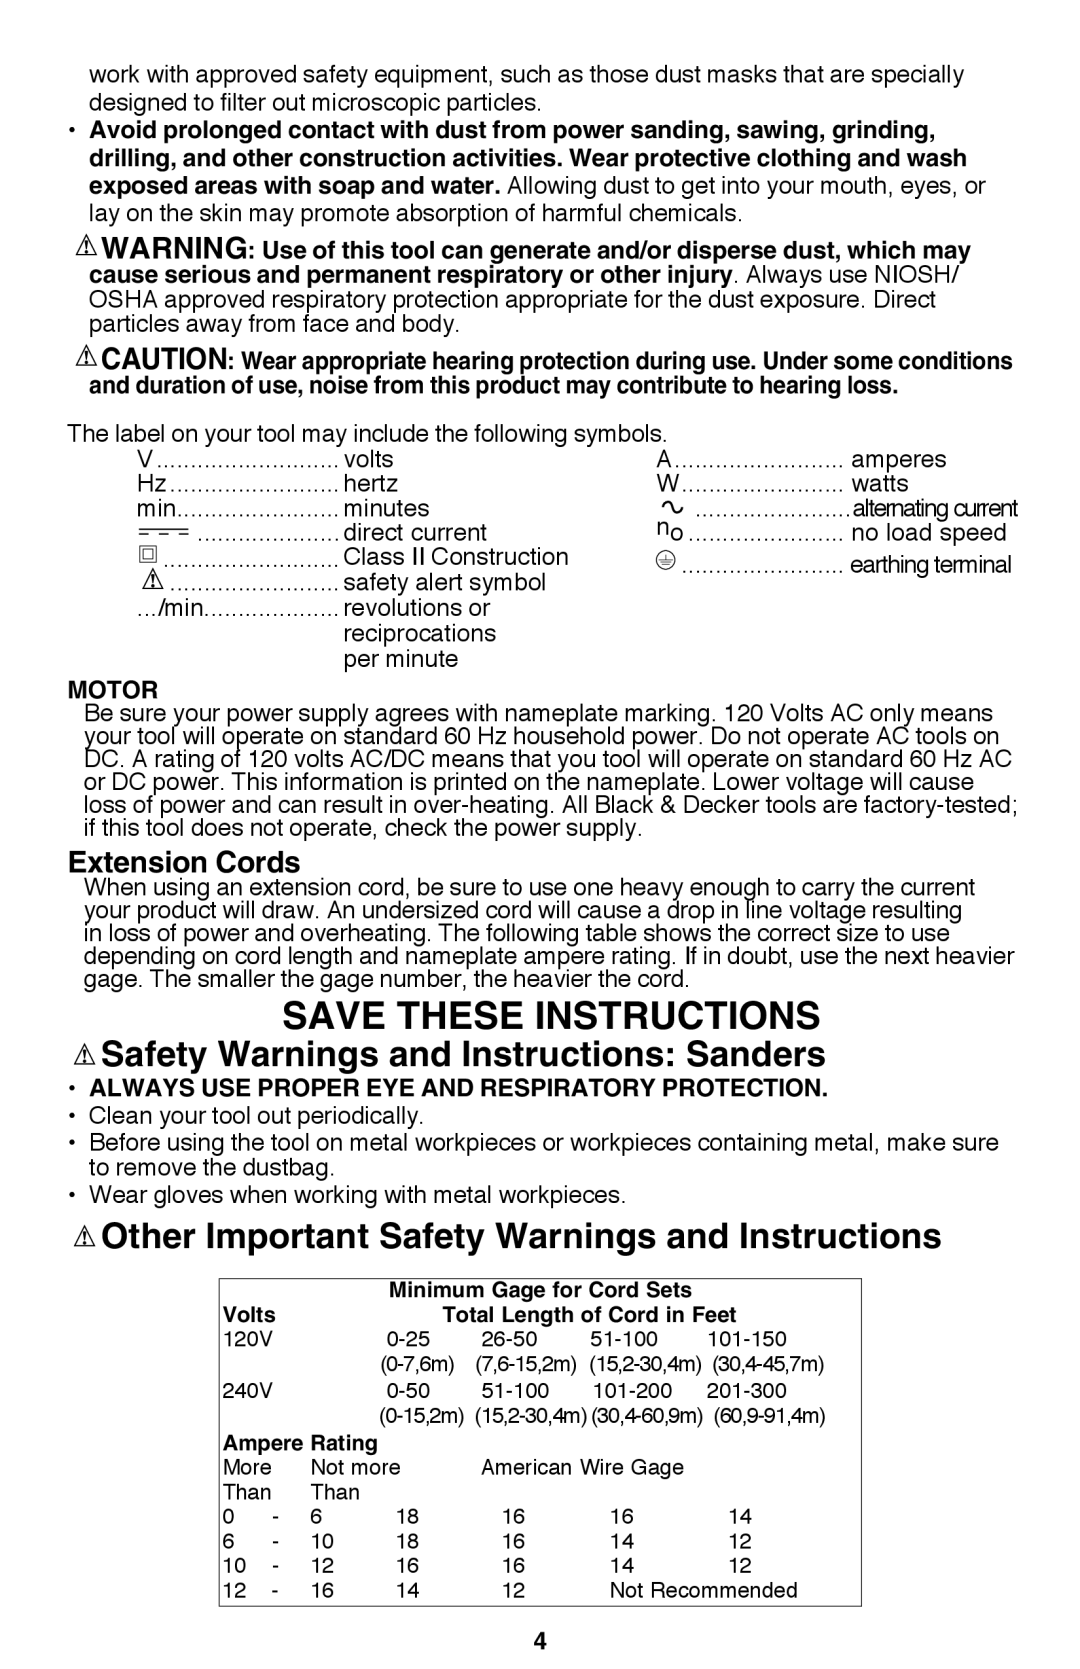 Black & Decker PF260 instruction manual Save these instructions, Safety Warnings and Instructions Sanders, Extension Cords 